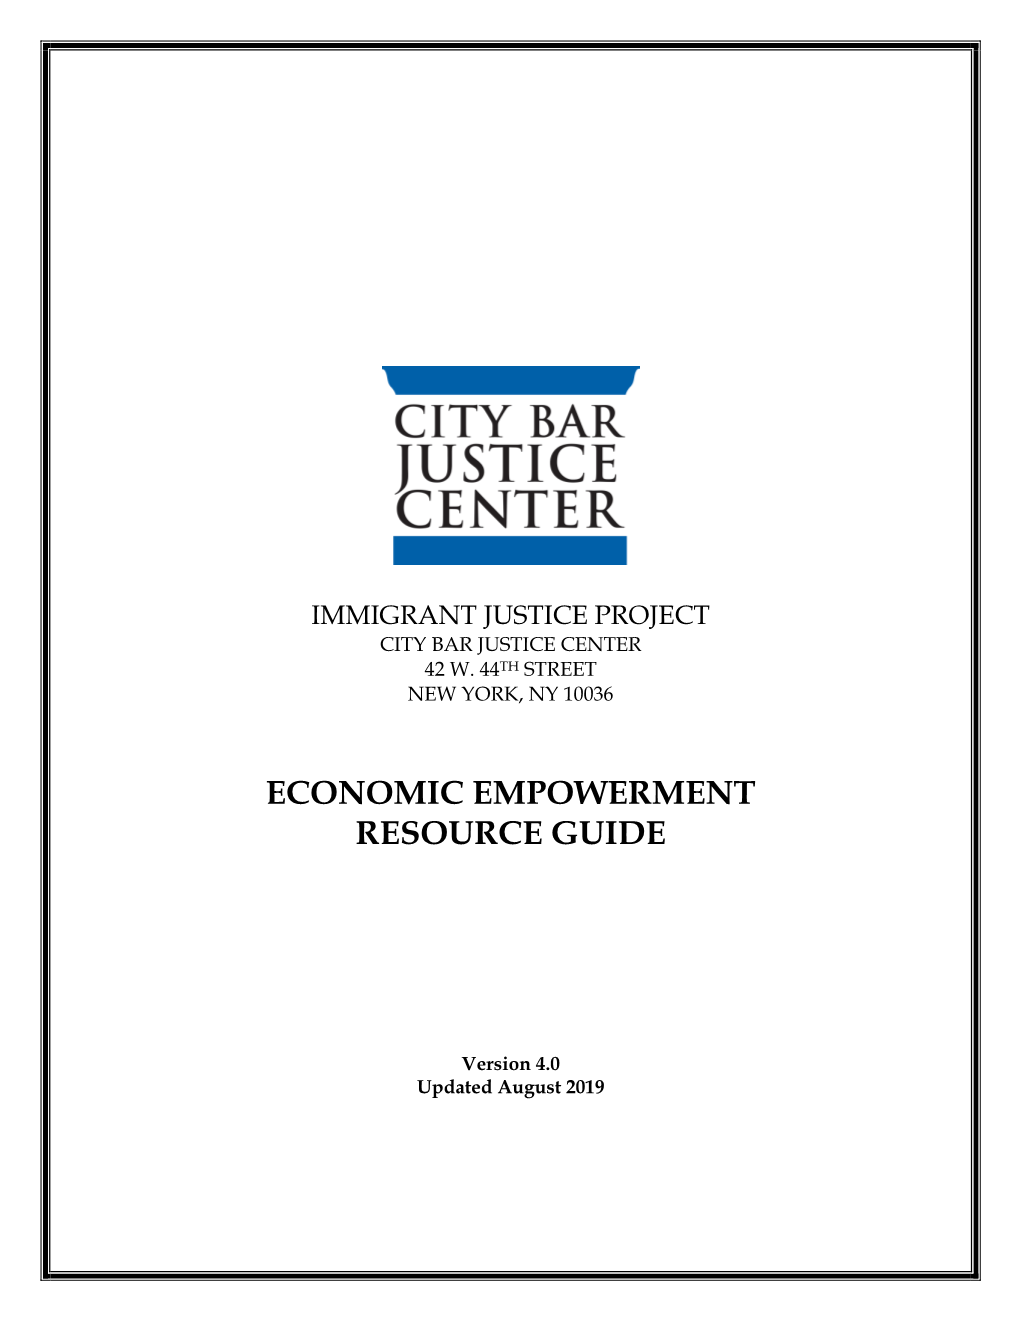 Economic Empowerment Resource Guide (August 2019)